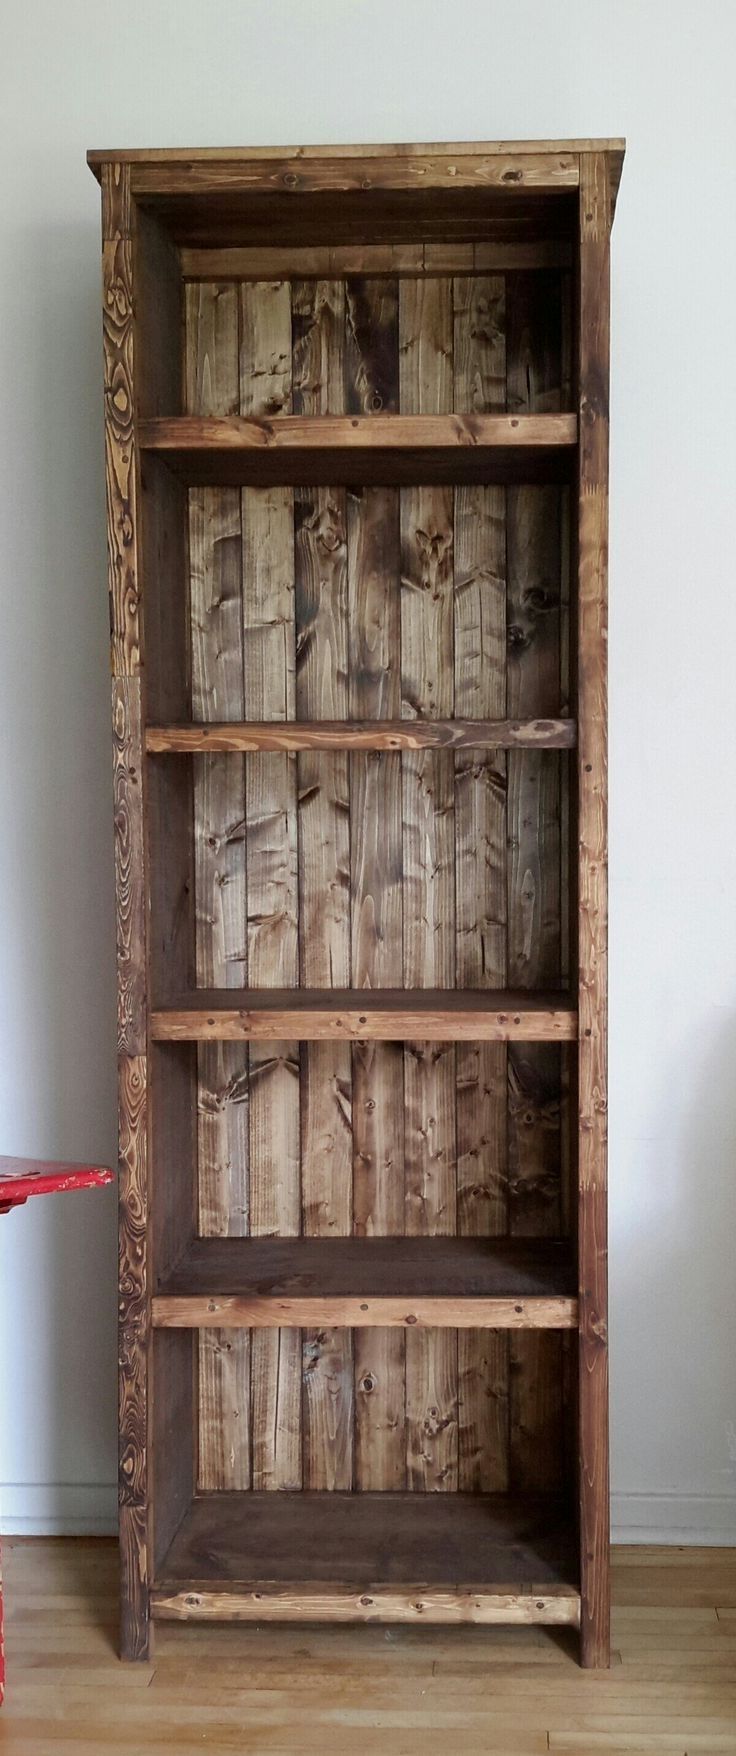 Large Solid Wood Bookcases Pertaining To Best And Newest White And Wood Bookcase Bookshelves Diy Rustic Farmhouse Bookshelf (View 9 of 15)